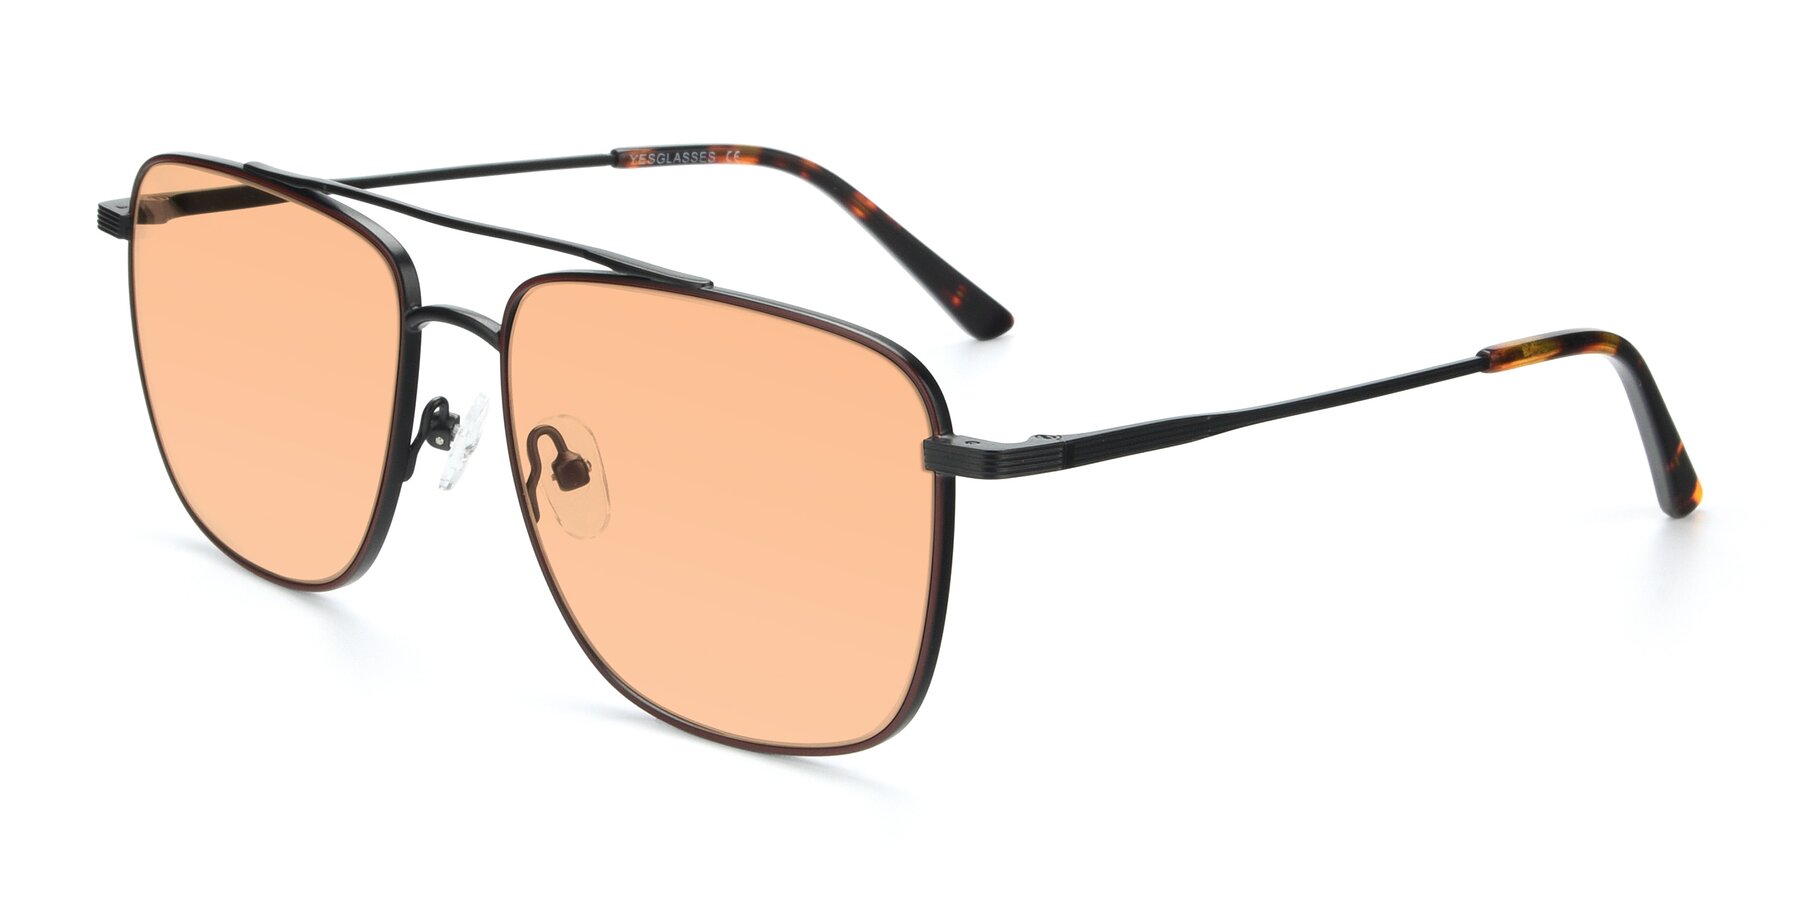 Angle of 9519 in Brown-Black with Light Orange Tinted Lenses